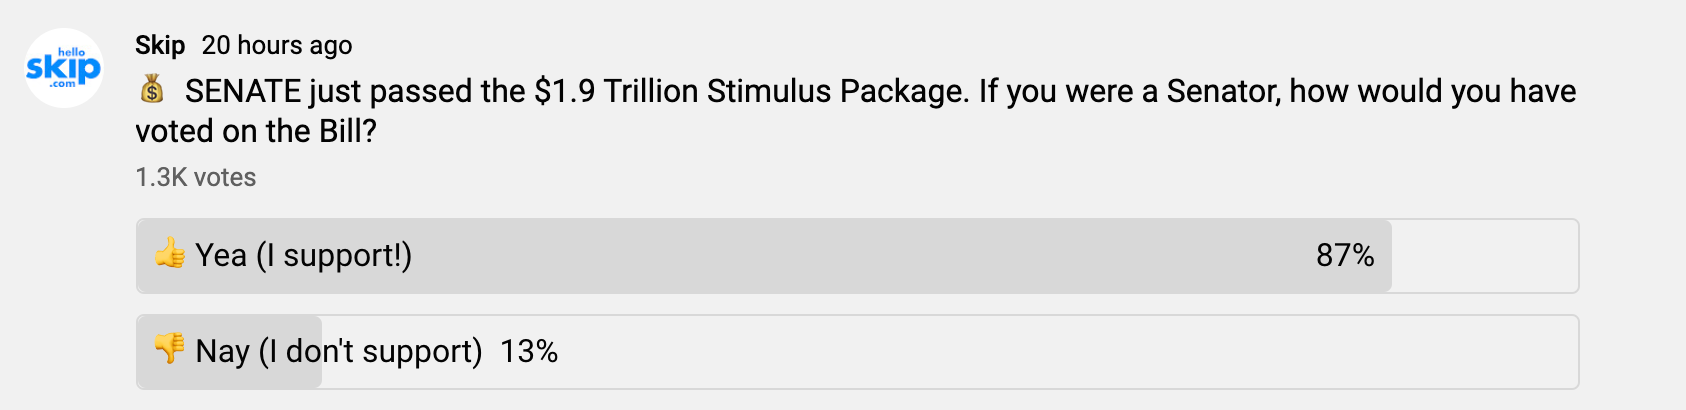 https://static.helloskip.com/blog/2021/03/YouTube-Stimulus-Package-Poll-March-6-2021.png